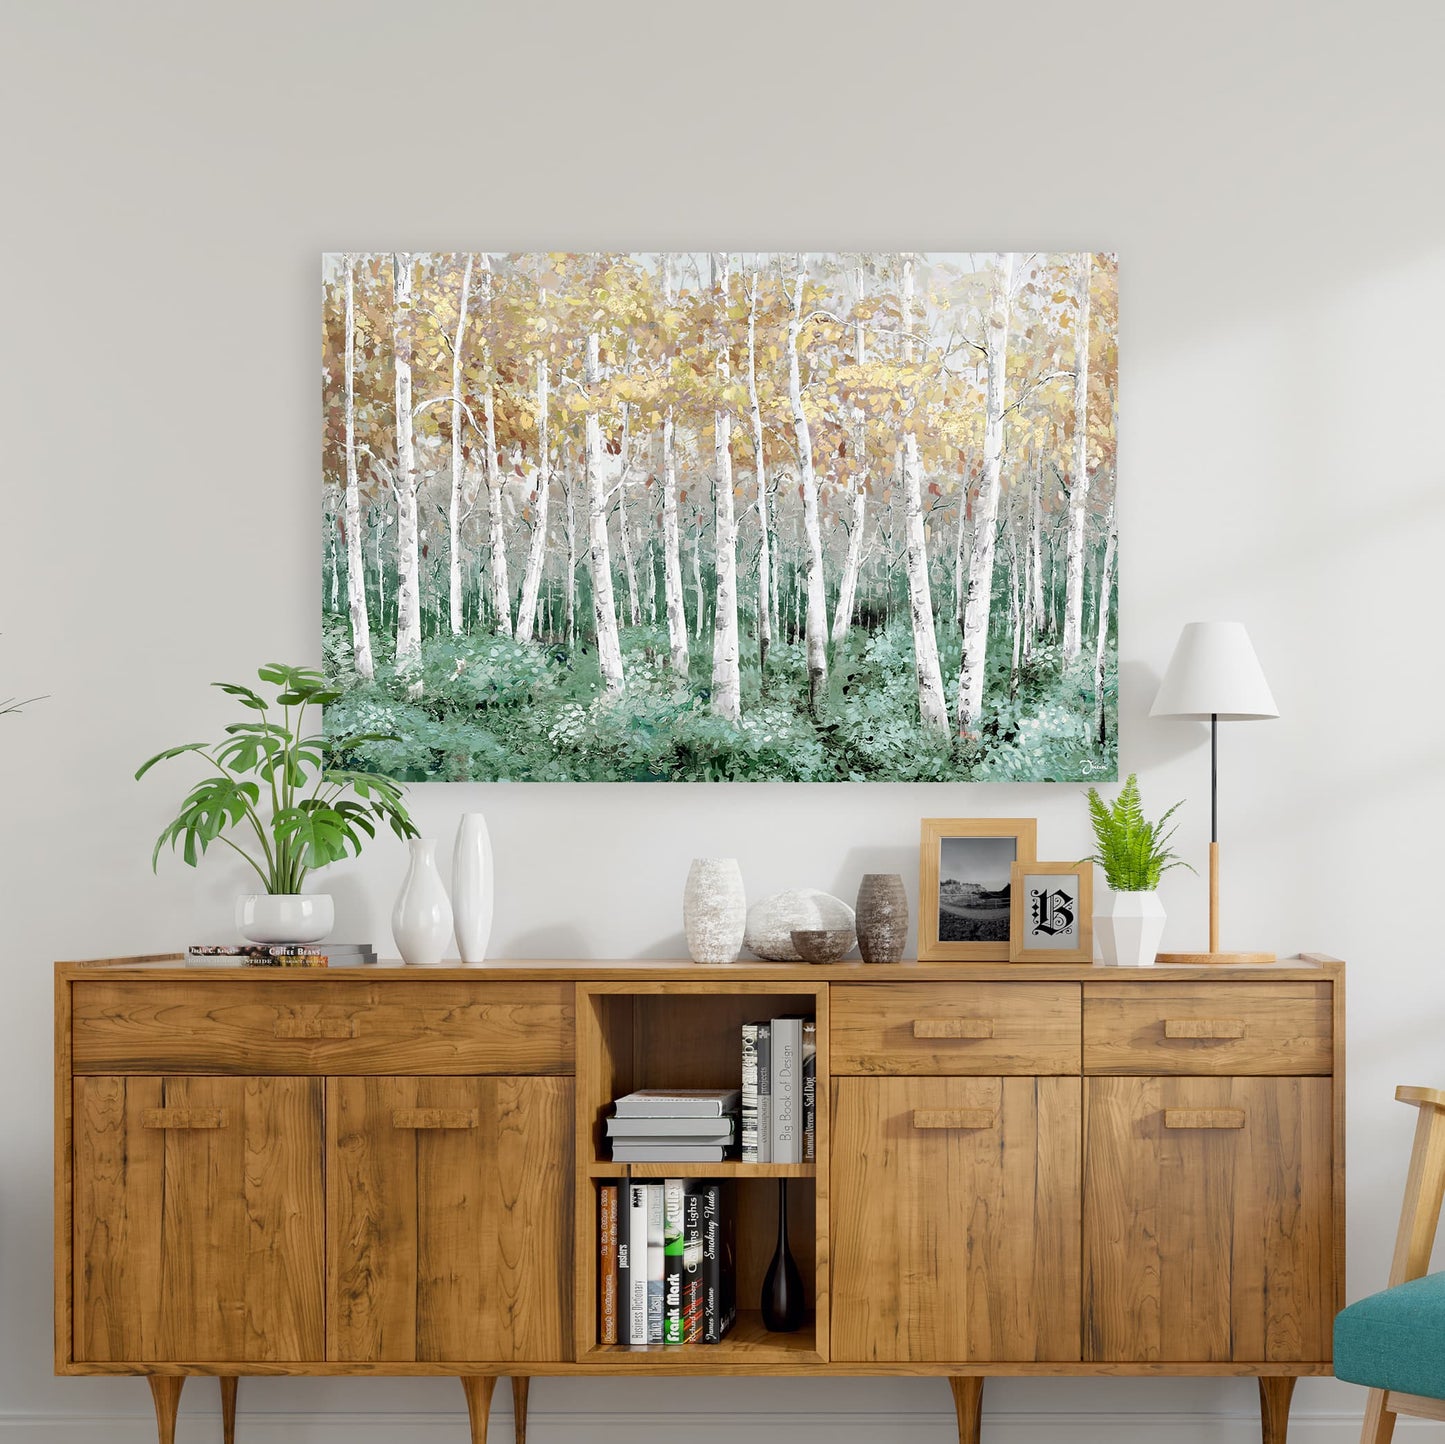 Hand-painted Art "Golden Woods" Painting original, Canvas Wall art for living room, bedroom, office, entryway - Wrapped Canvas Painting